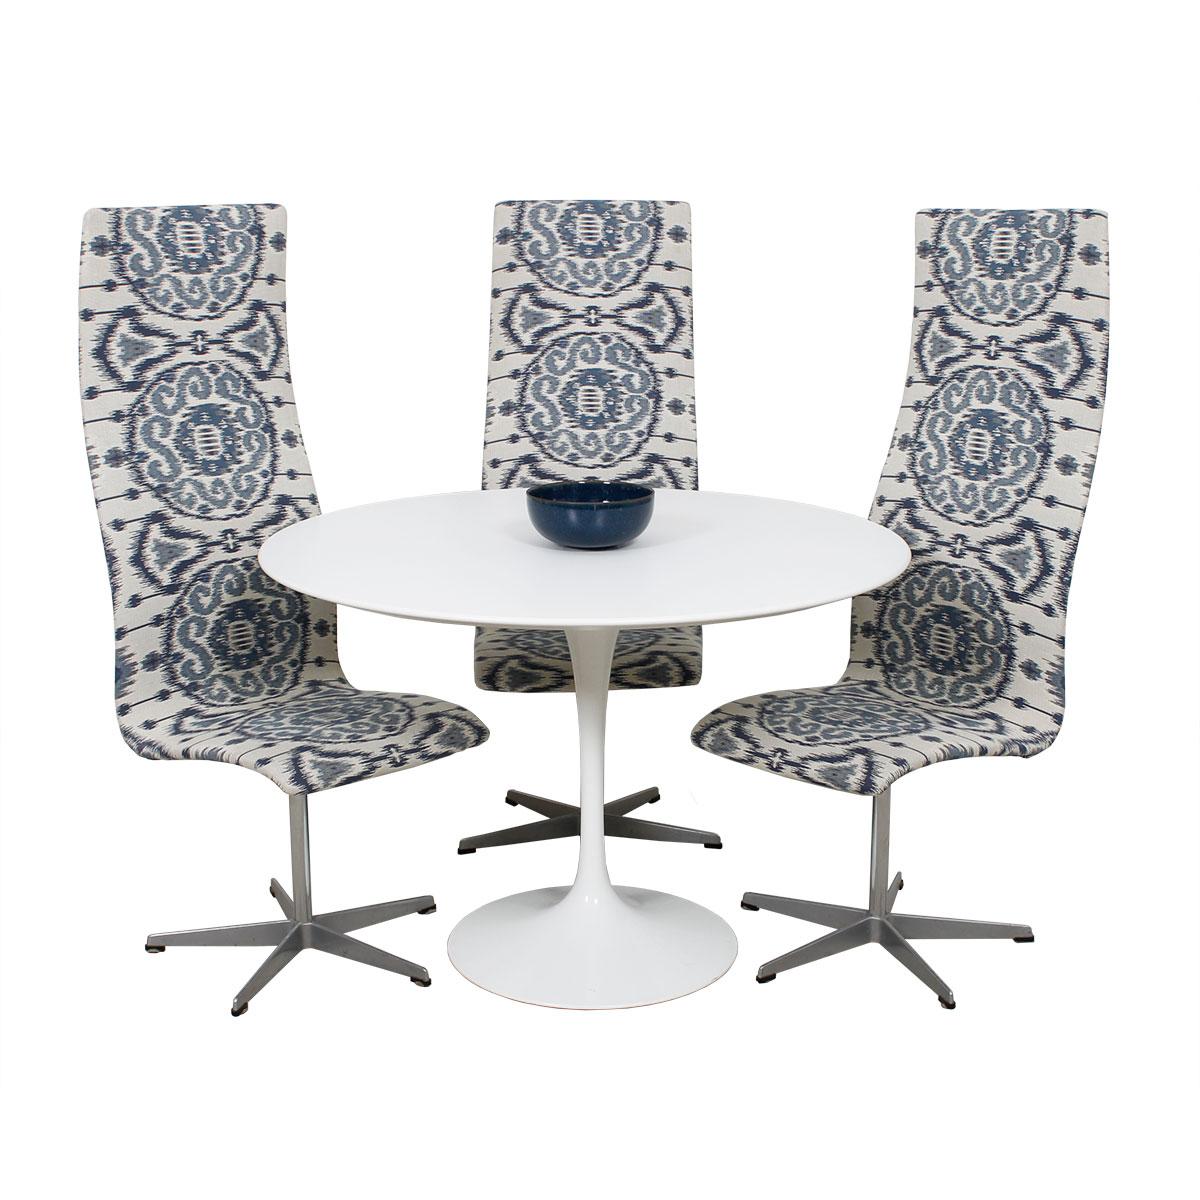 Set of 6 Vintage Fritz Hansen Oxford Chairs in New Blue & White Ikat Upholstery For Sale 8